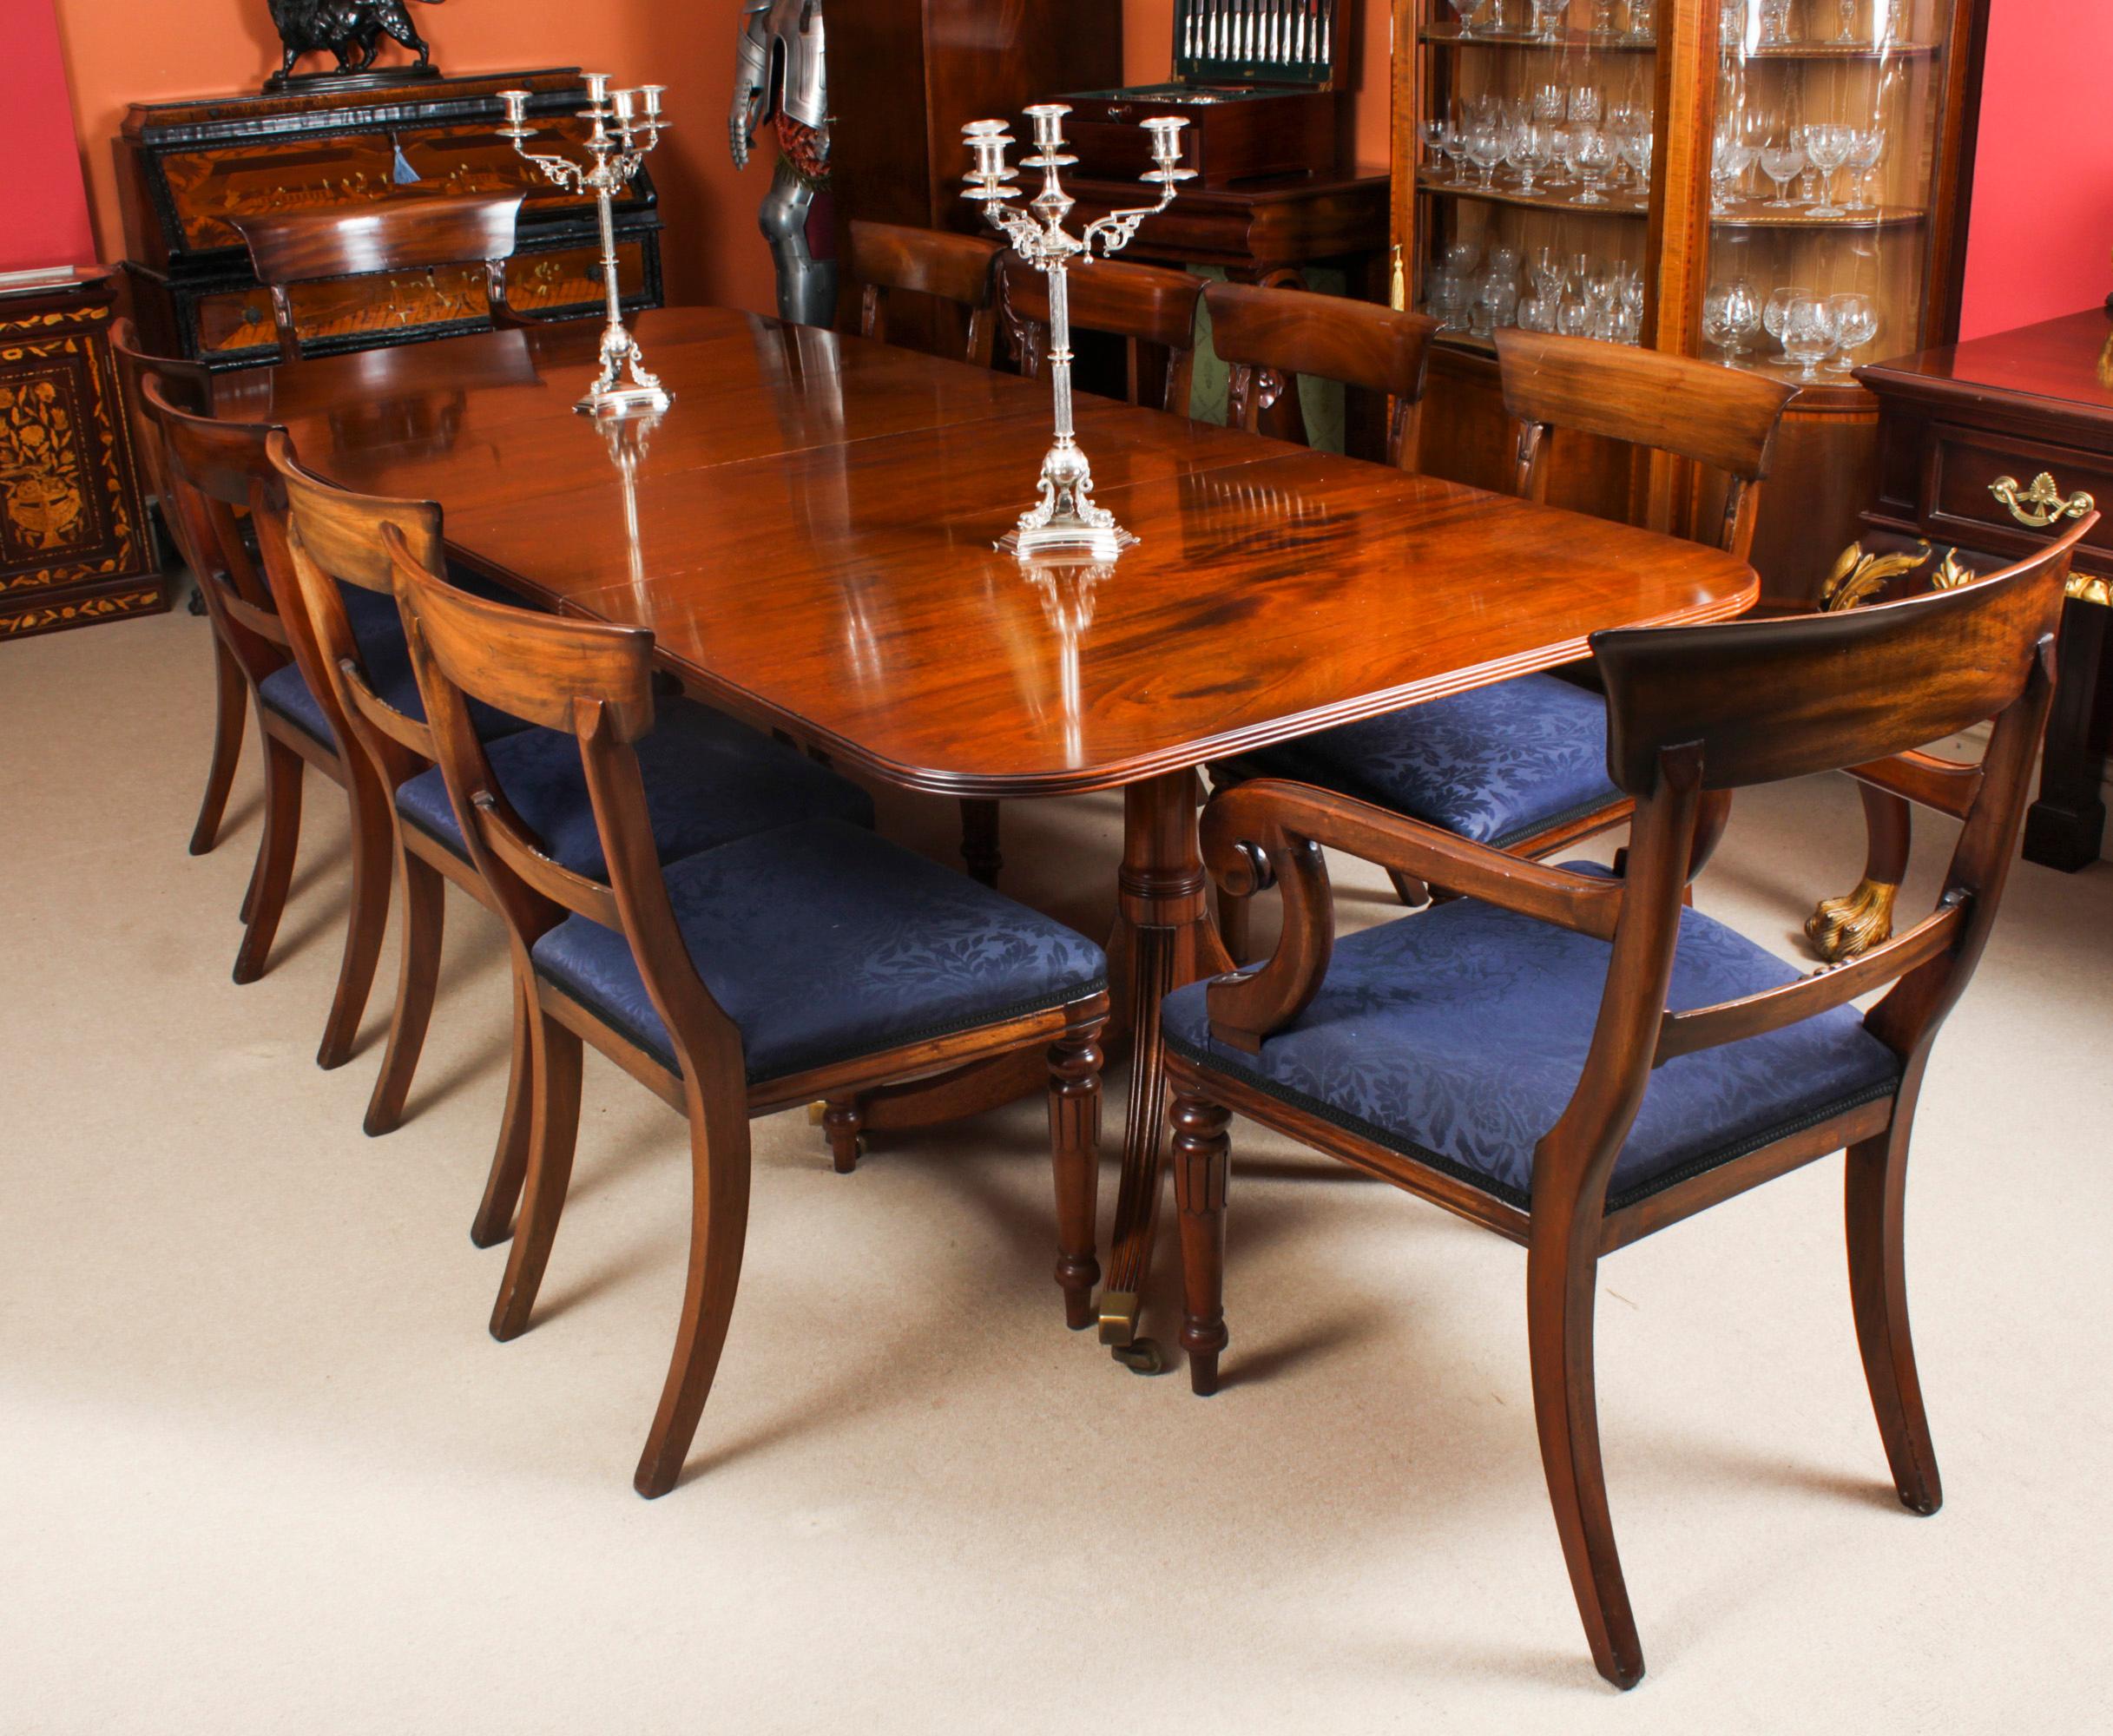 This is a fabulous Vintage Regency Revival dining set comprising a dining table and a set of ten bar back dining chairs, by William Tillman, Circa 1975 in date.

The table is made of stunning solid flame mahogany and is raised on twin 